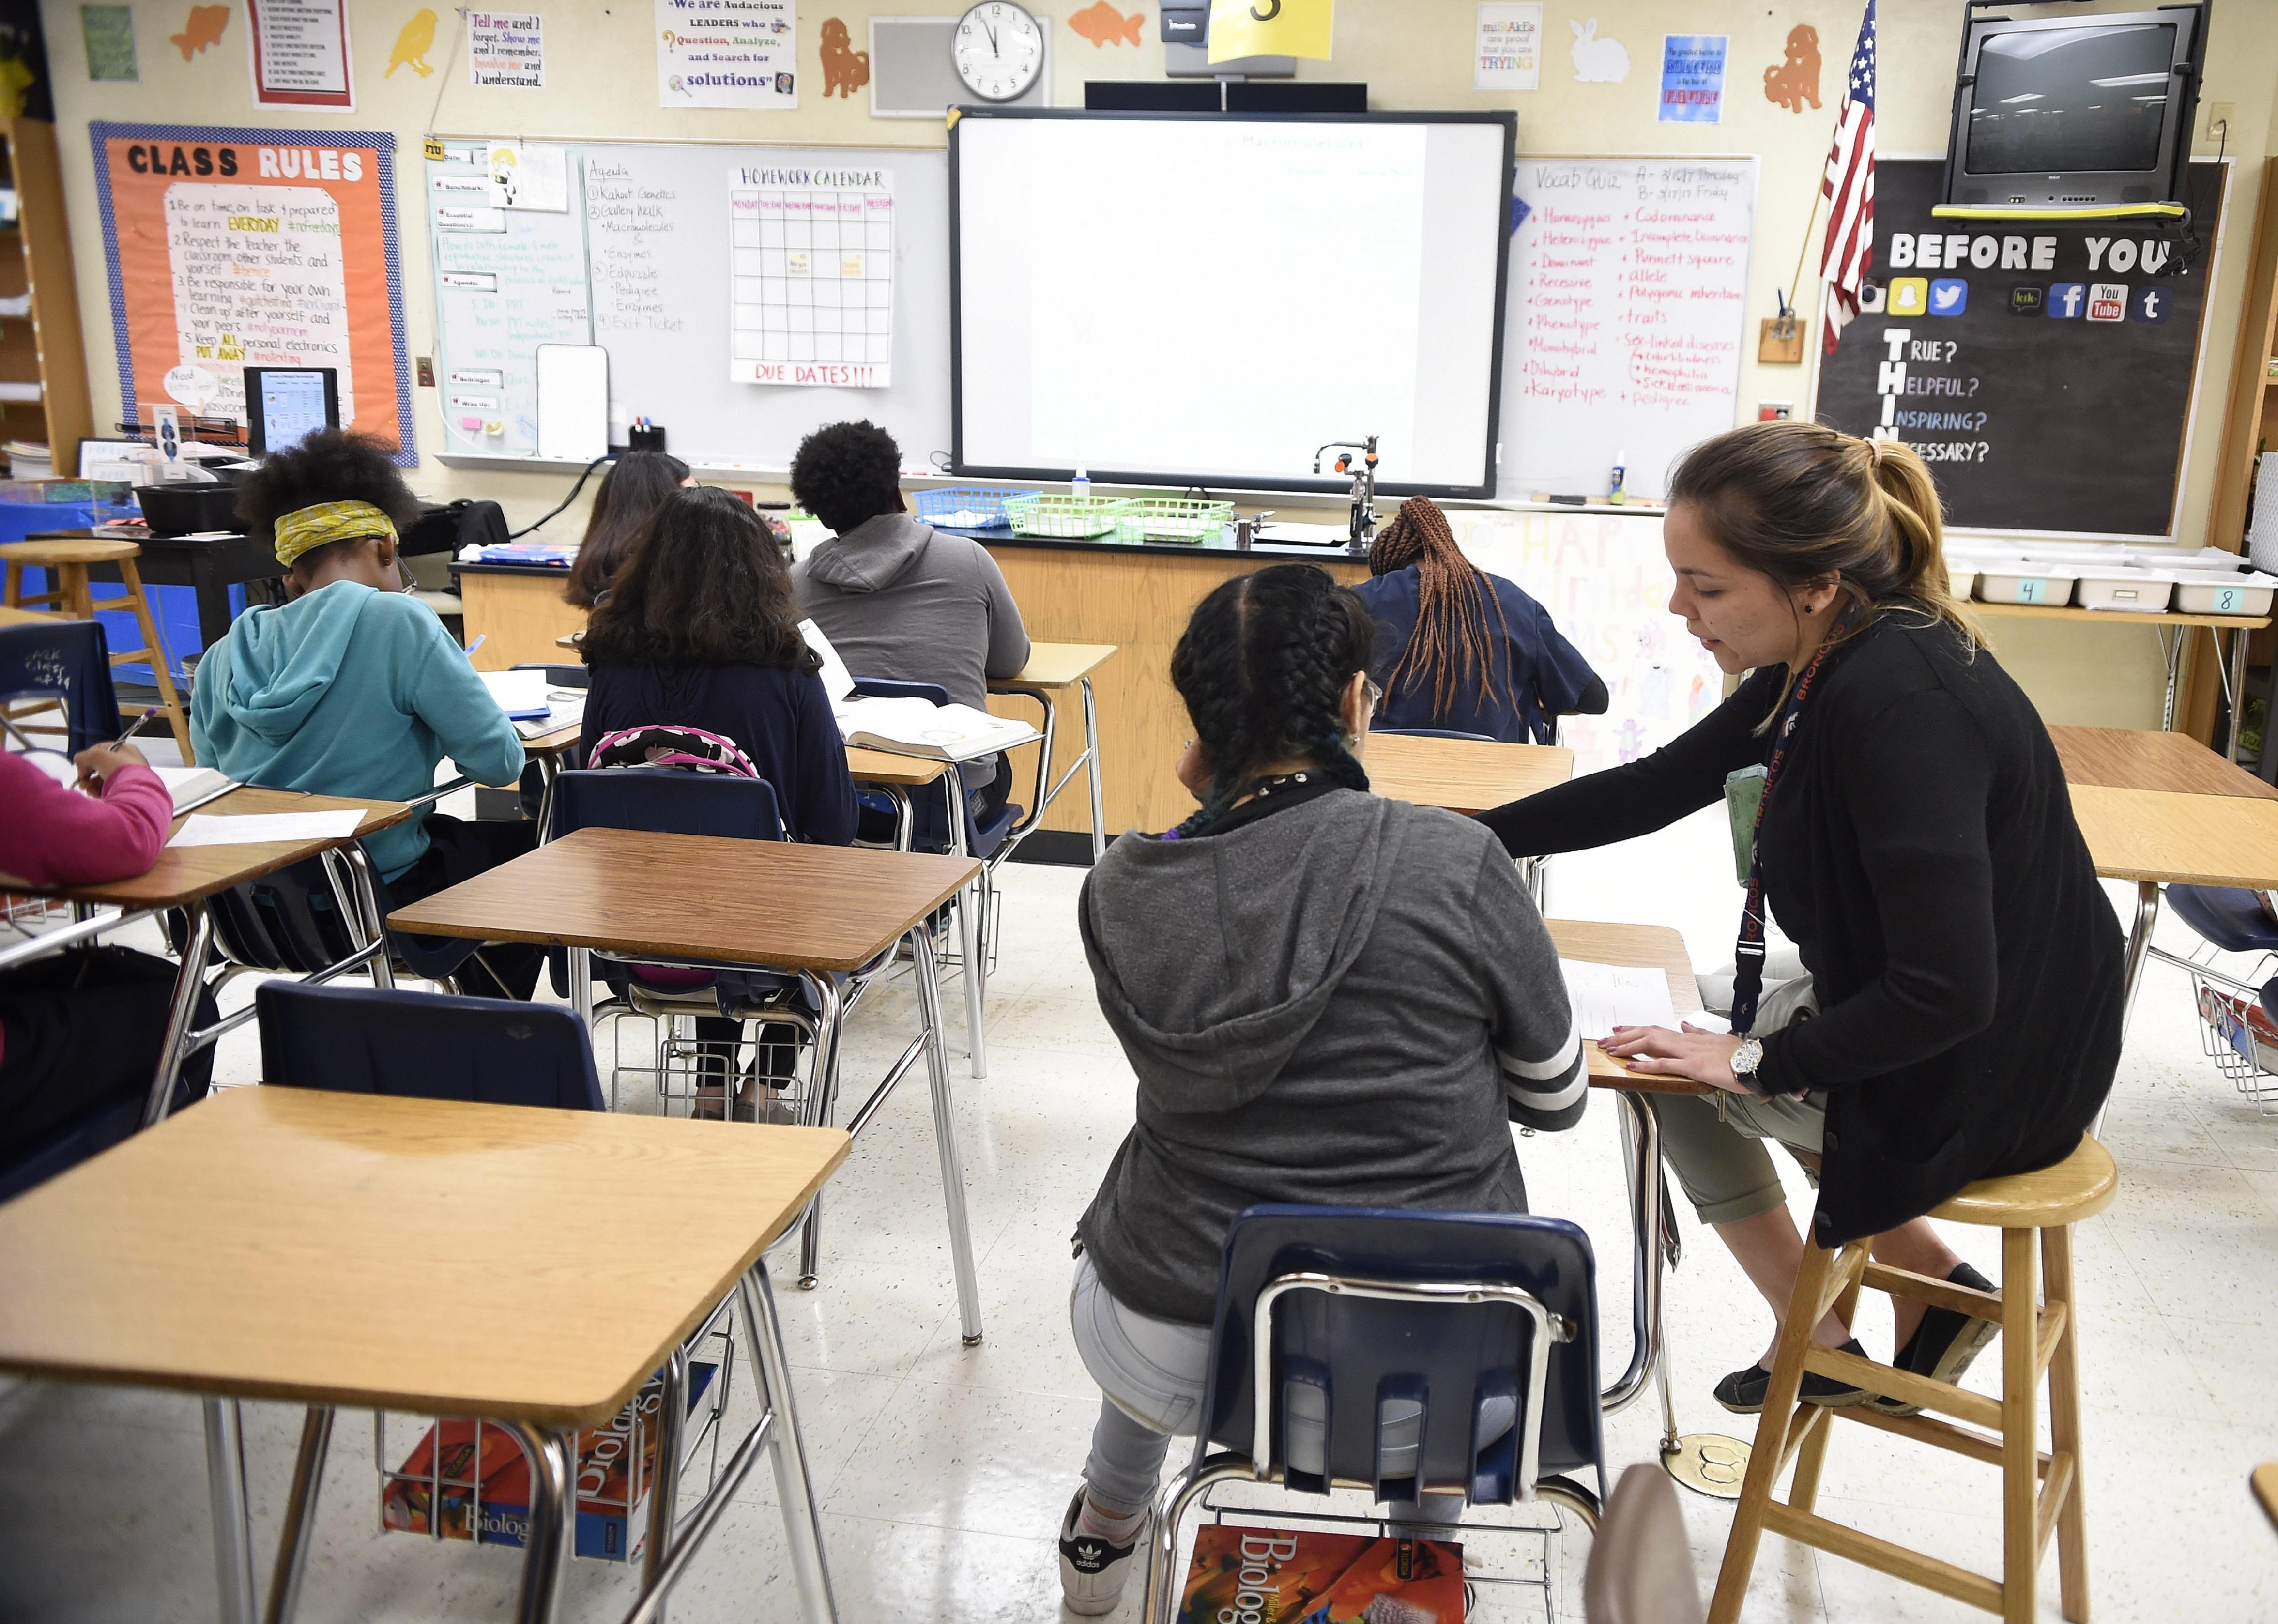 Science teacher Virginia Escobar-Cheng works with her students in a science class